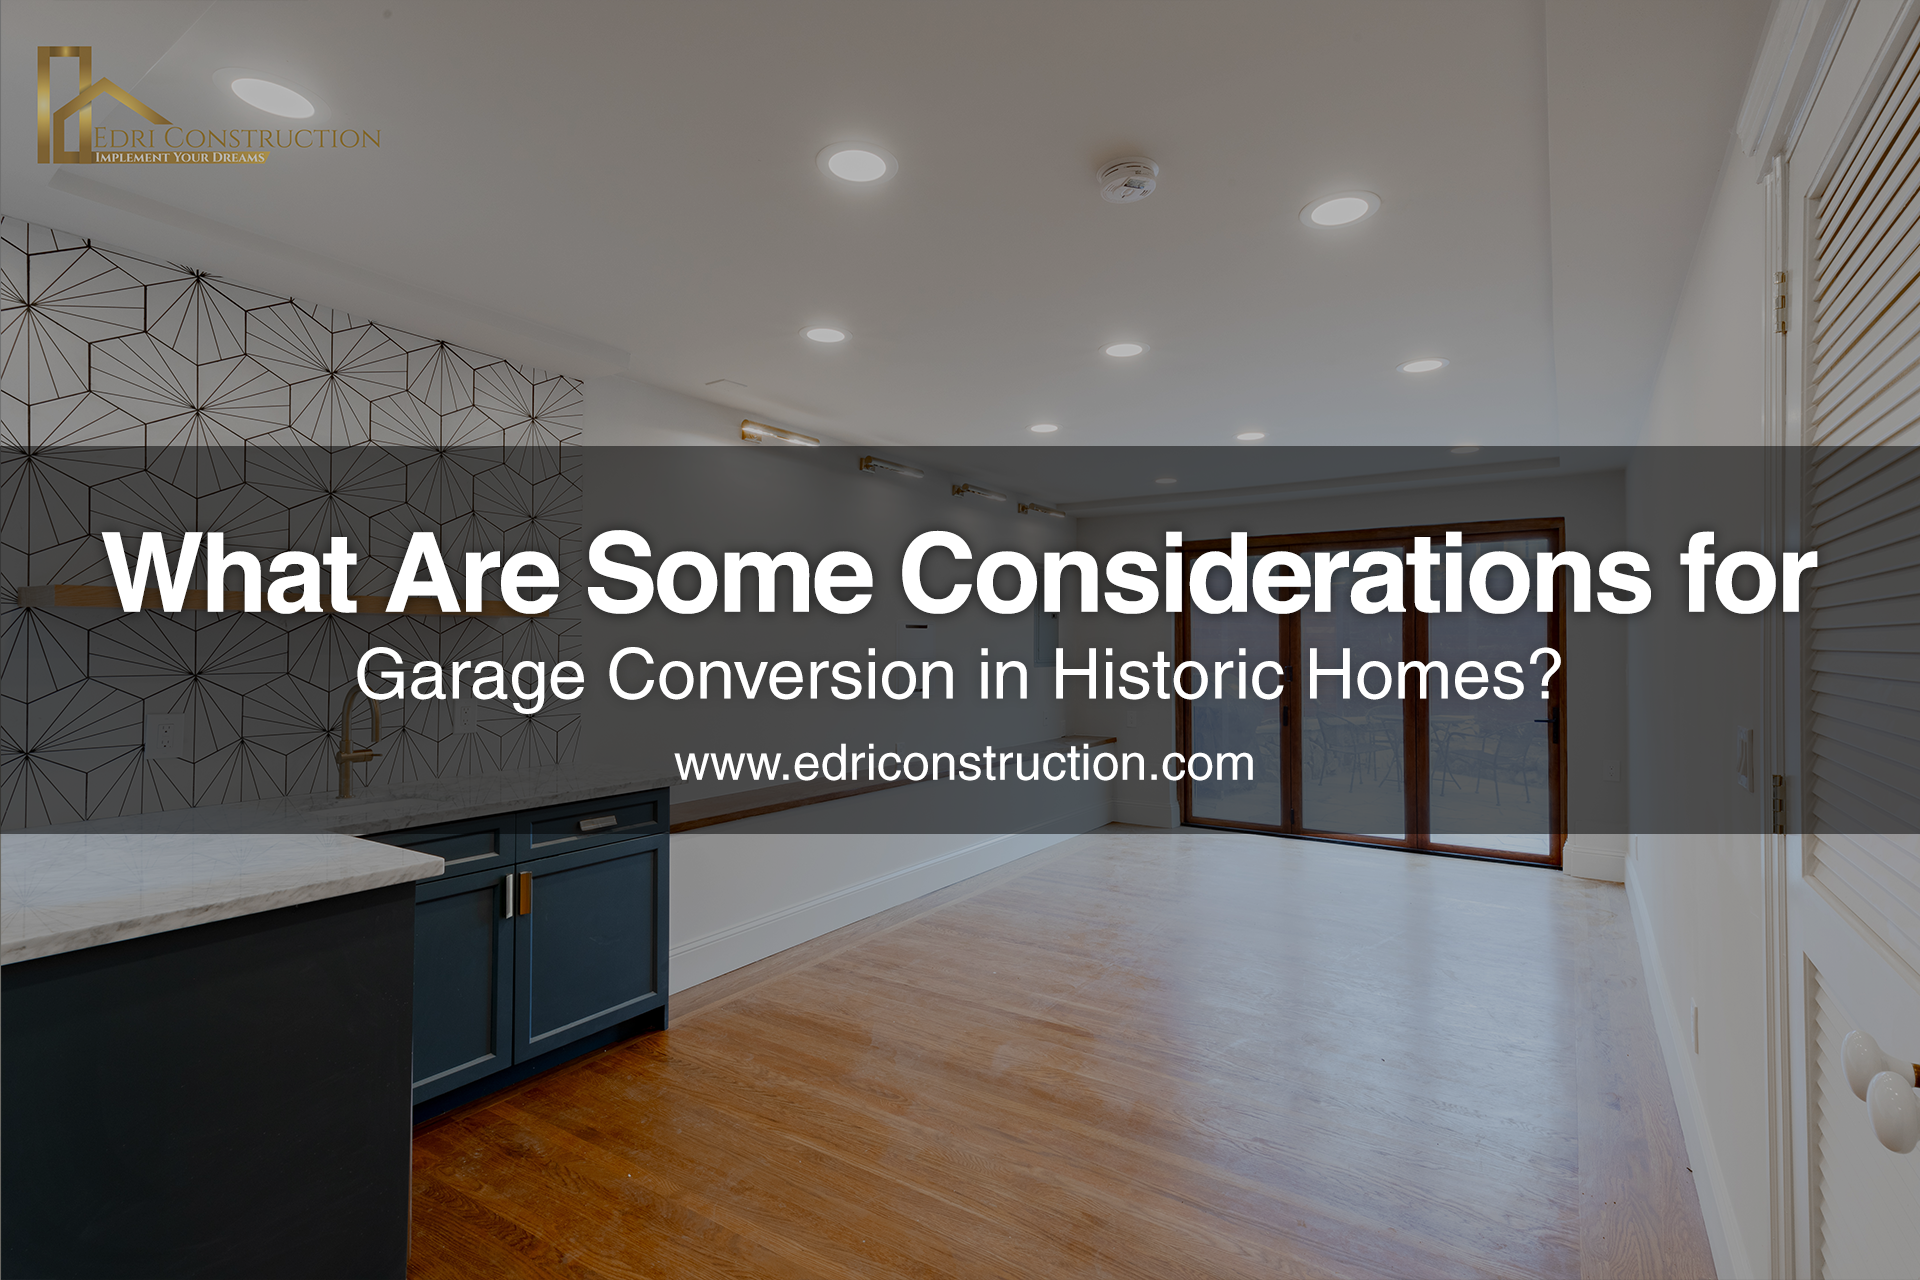 Considerations for Garage Conversion